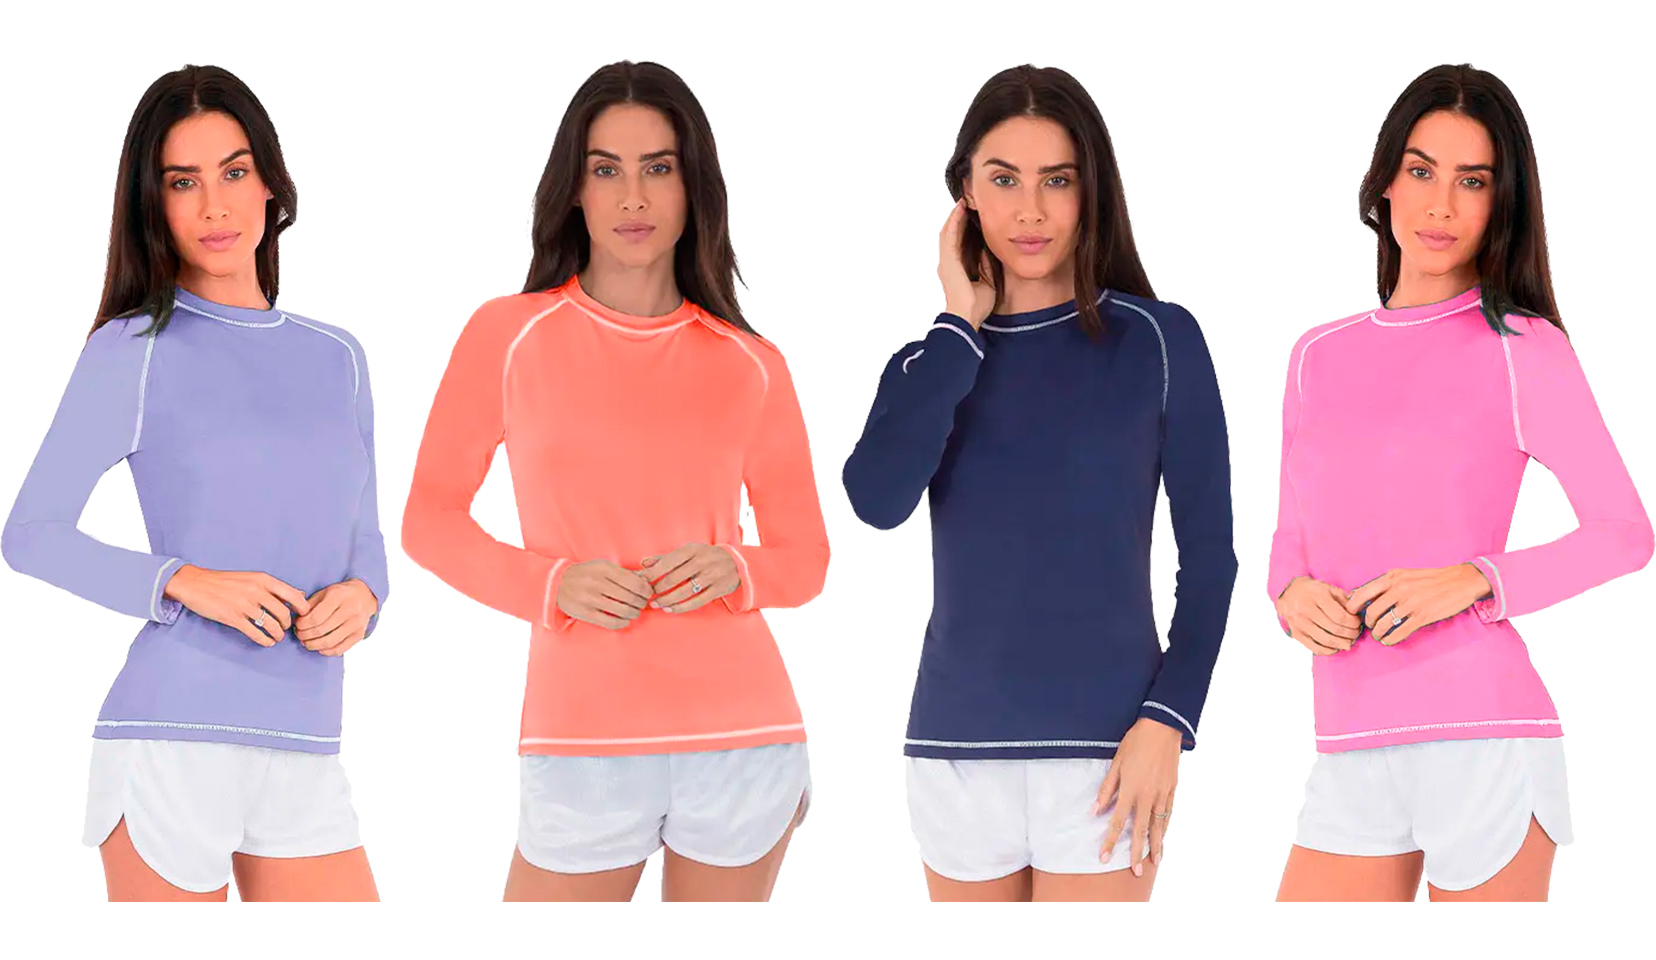 Women's Long Sleeved Rash Guards w/ Two Tone Seam Trim - Assorted Colors - Sizes Small-XL